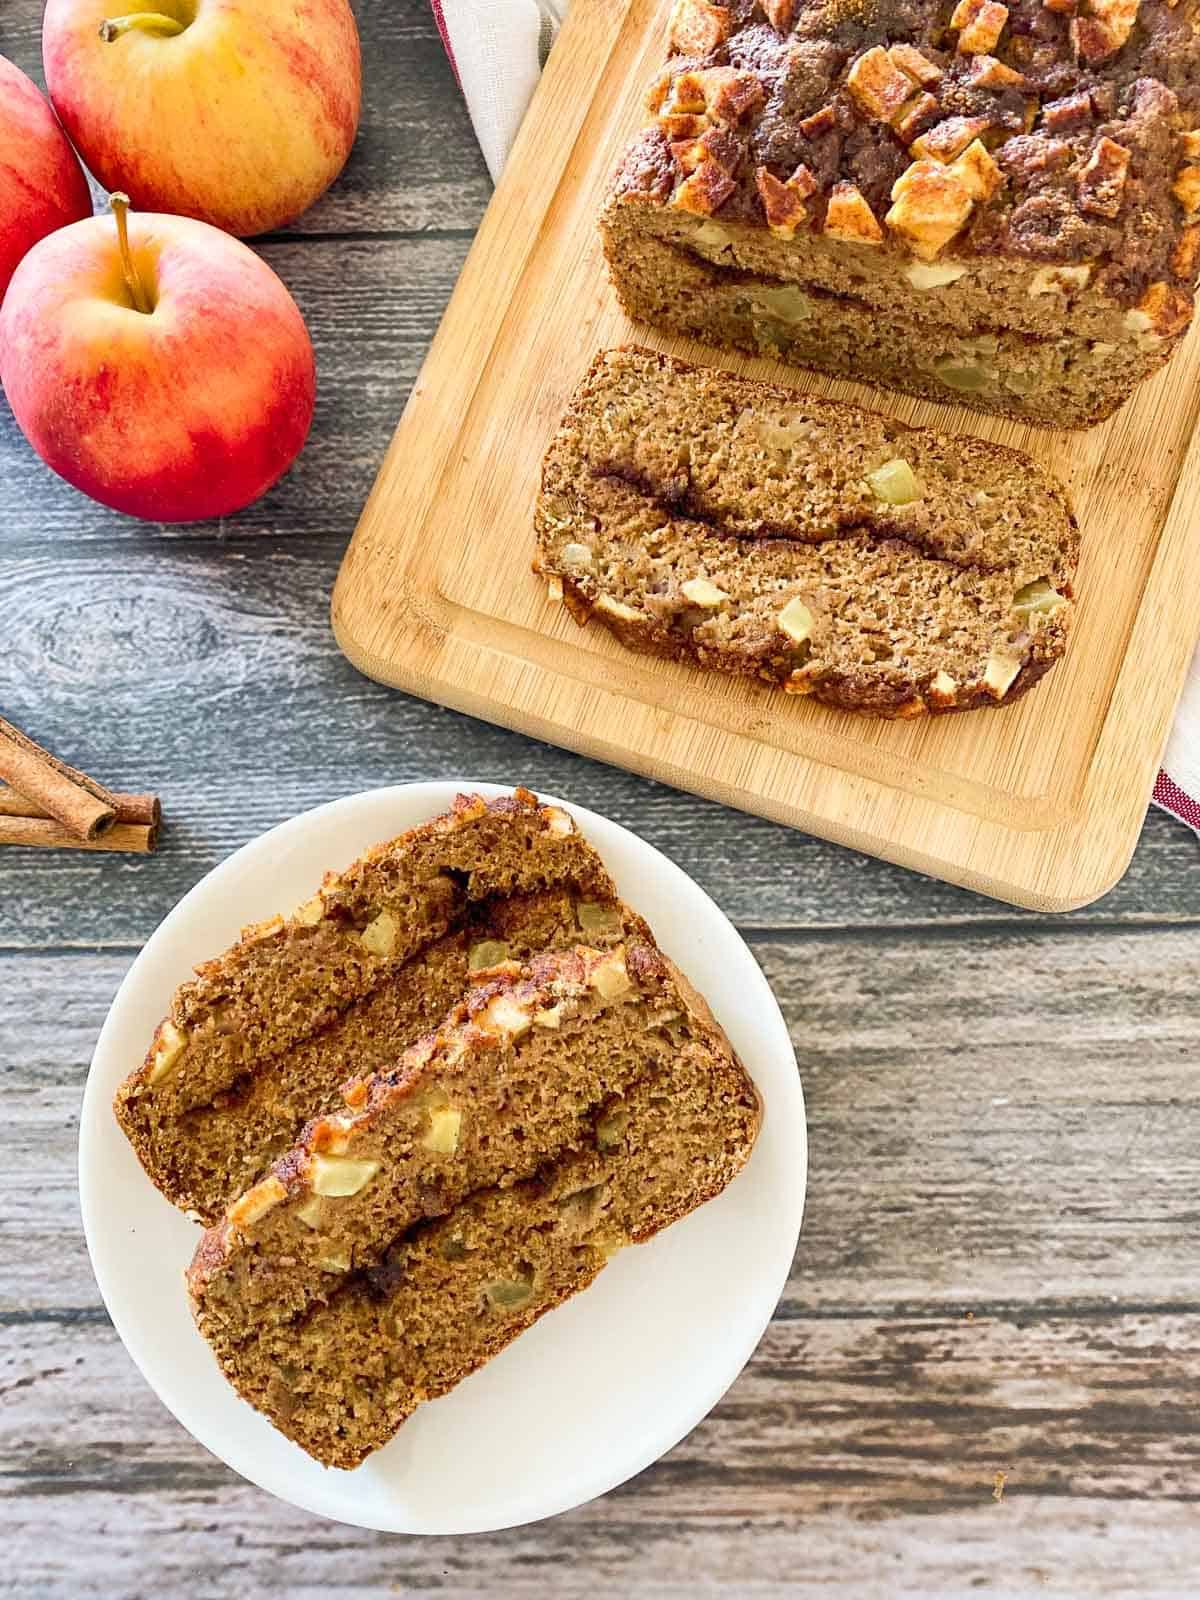 Apple bread loaf on cutting board and plate in front with two slices on it.